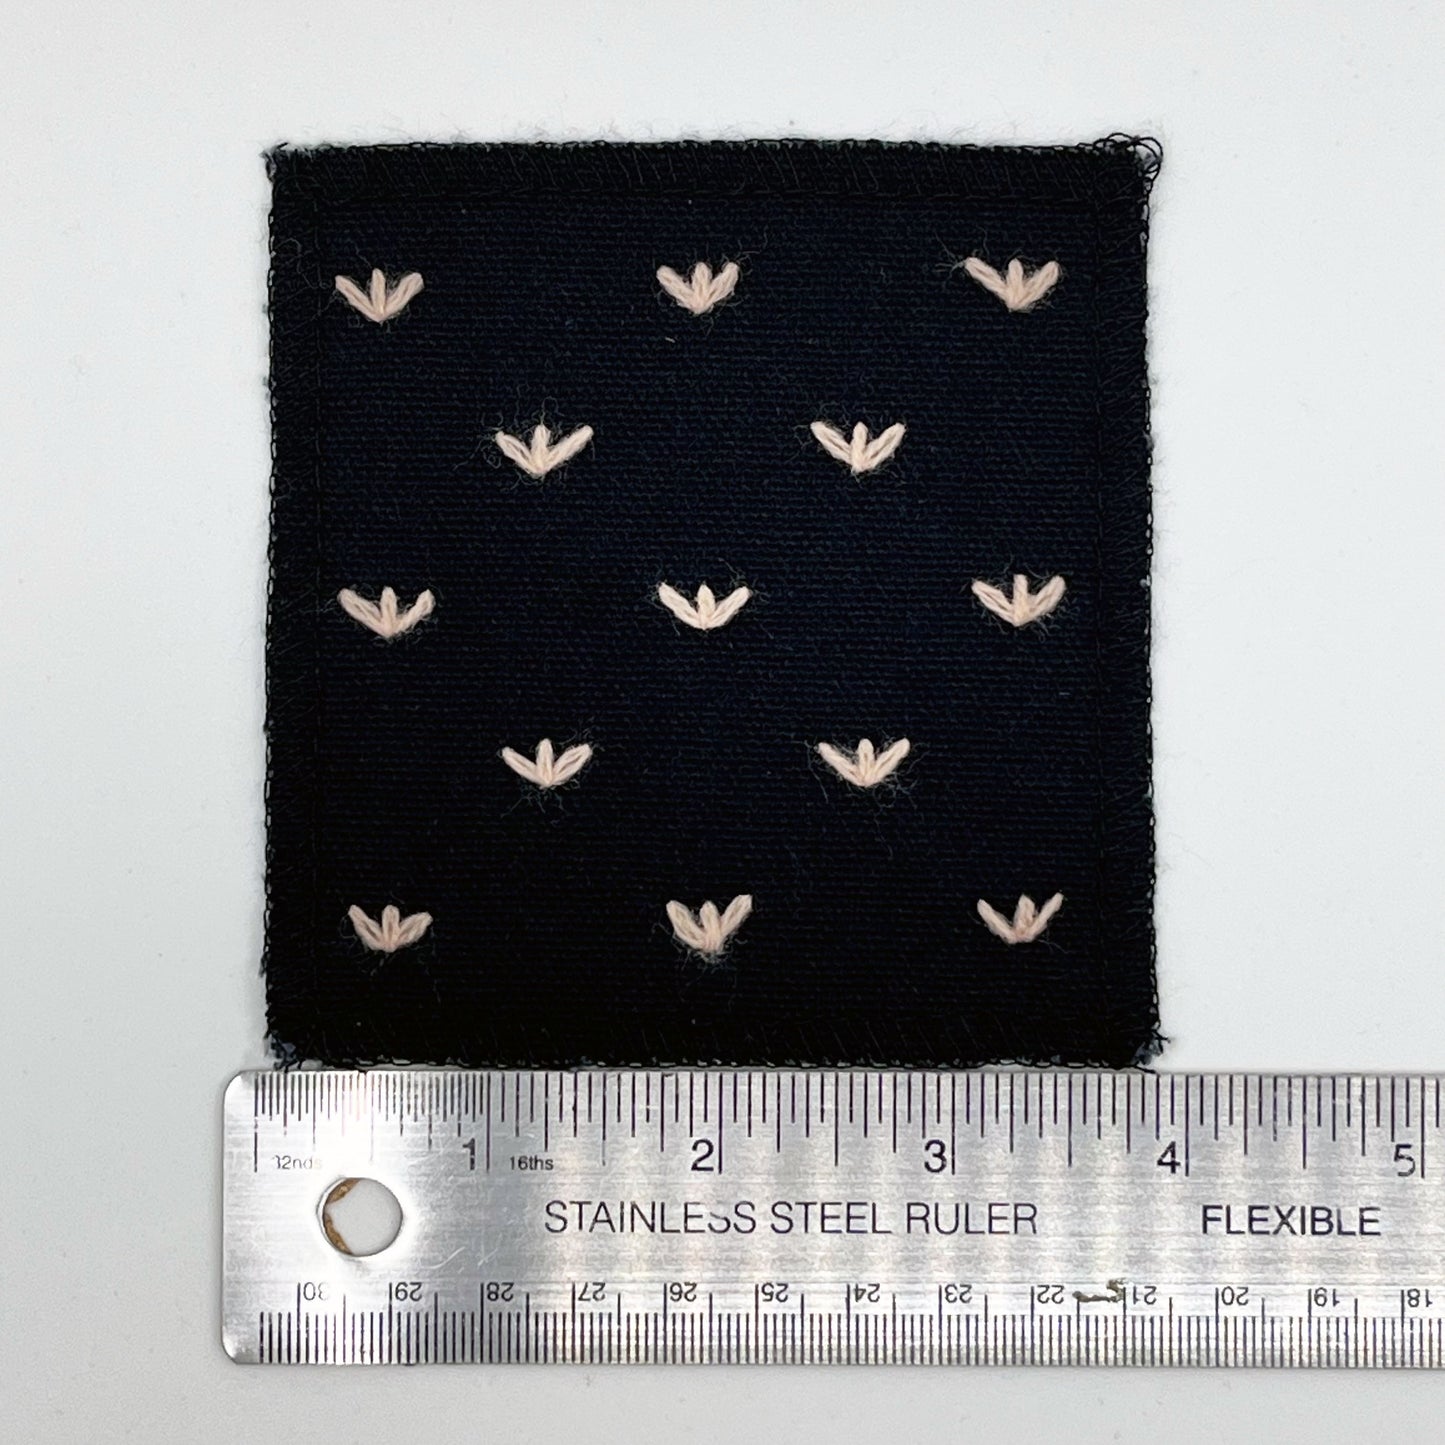 a square black canvas patch, with peach stitches that look like birds feet or sprouts spread out in a diamond pattern, with overlocked edges, placed next to a metal ruler to show a width of four inches, on a white background